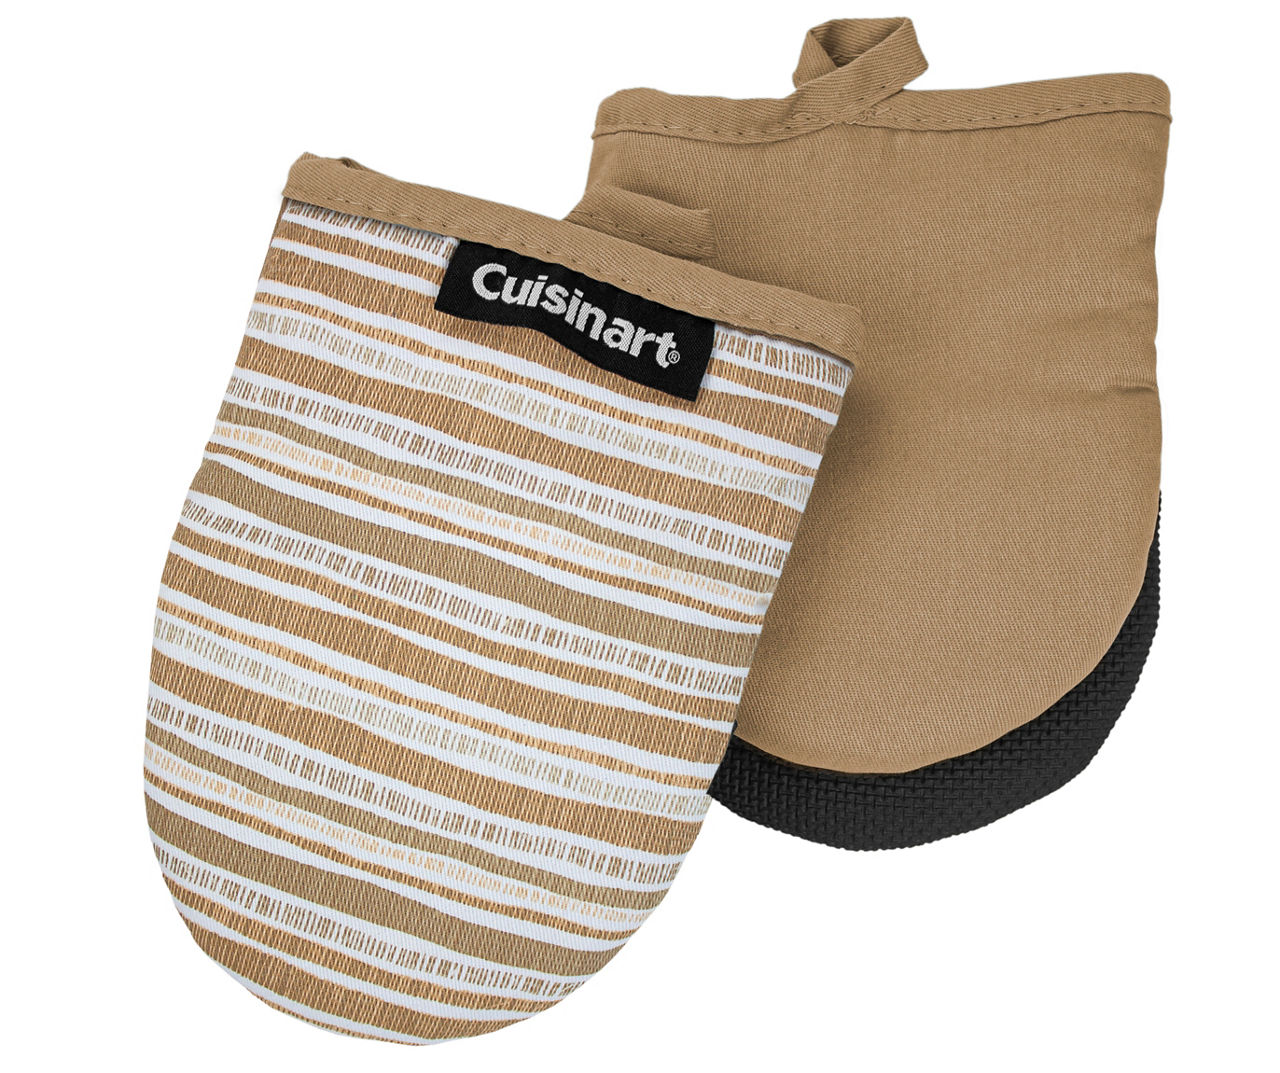 Cuisinart Bbq Oven Mitts (2 ct), Delivery Near You